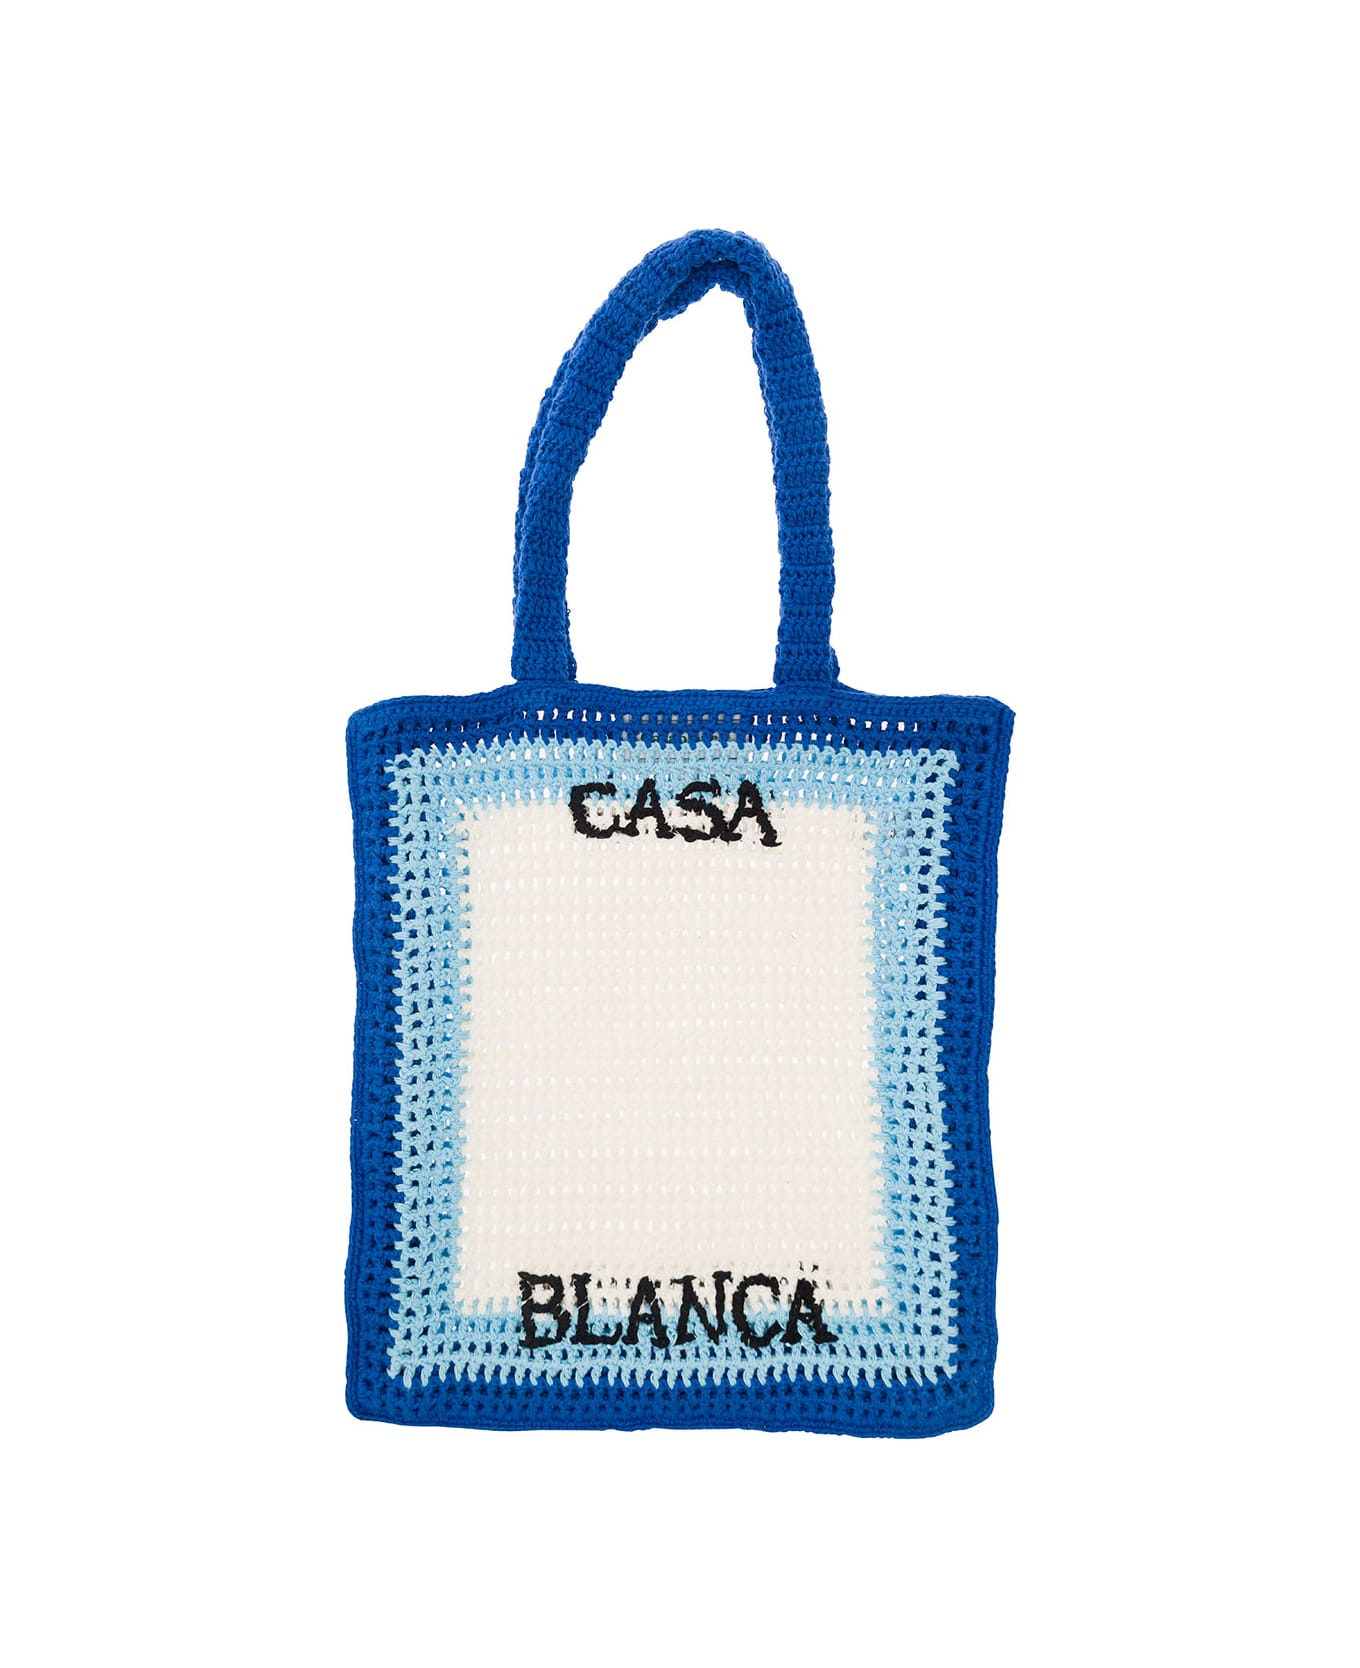 Casablanca 'atlantis' Blue And White Tote Bag With Contrasting Logo Embroidery In Cotton Crochet Woman - Blu